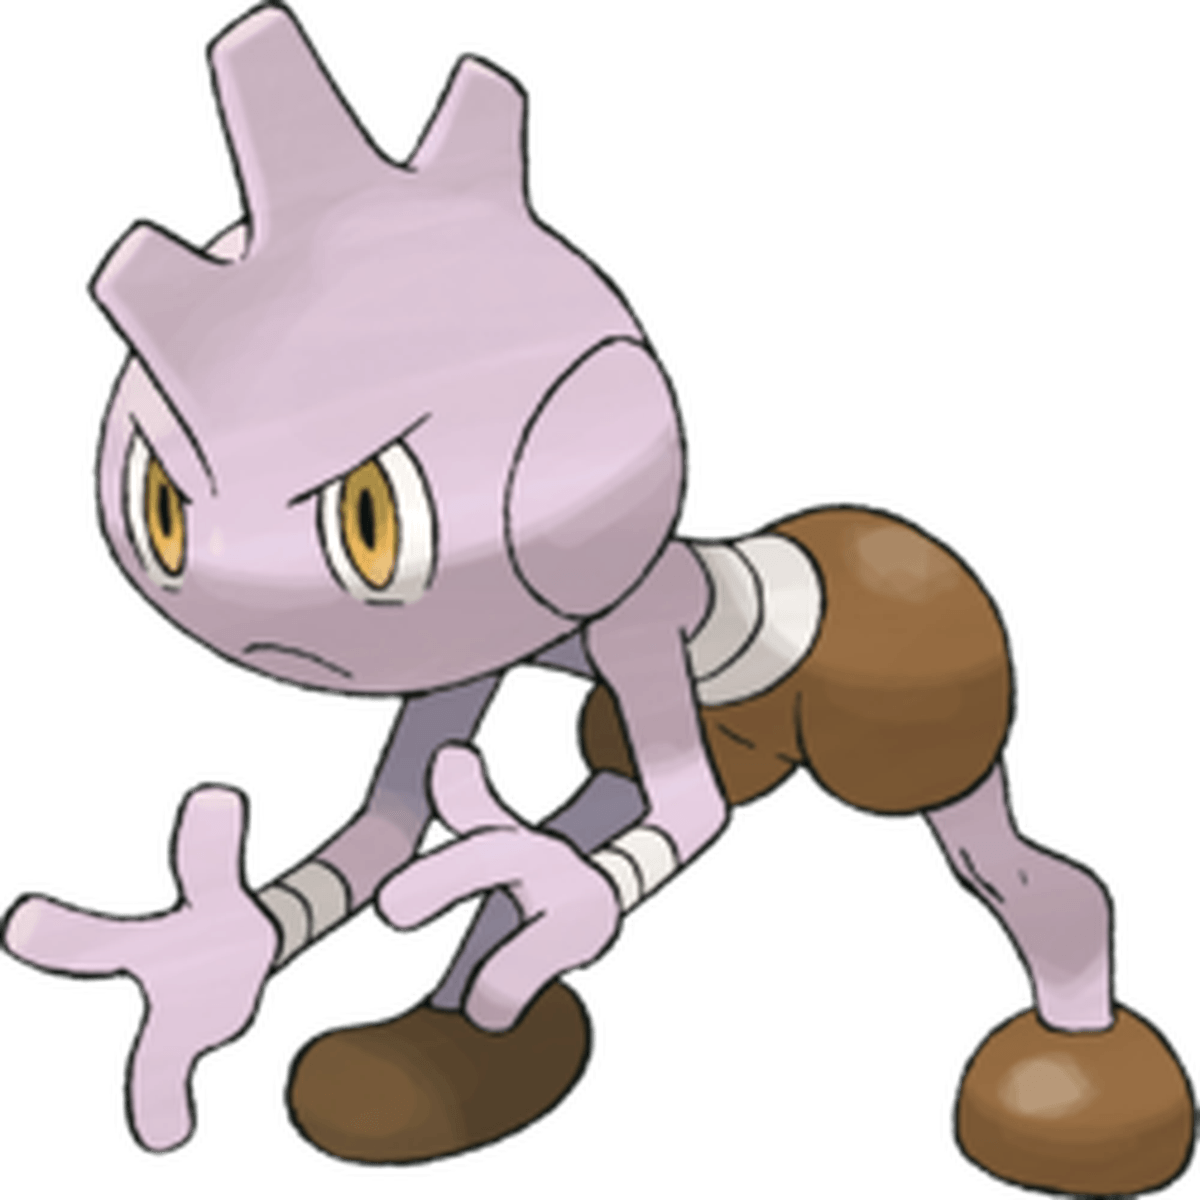 These are Pokémon Go’s gen two monsters to look out for